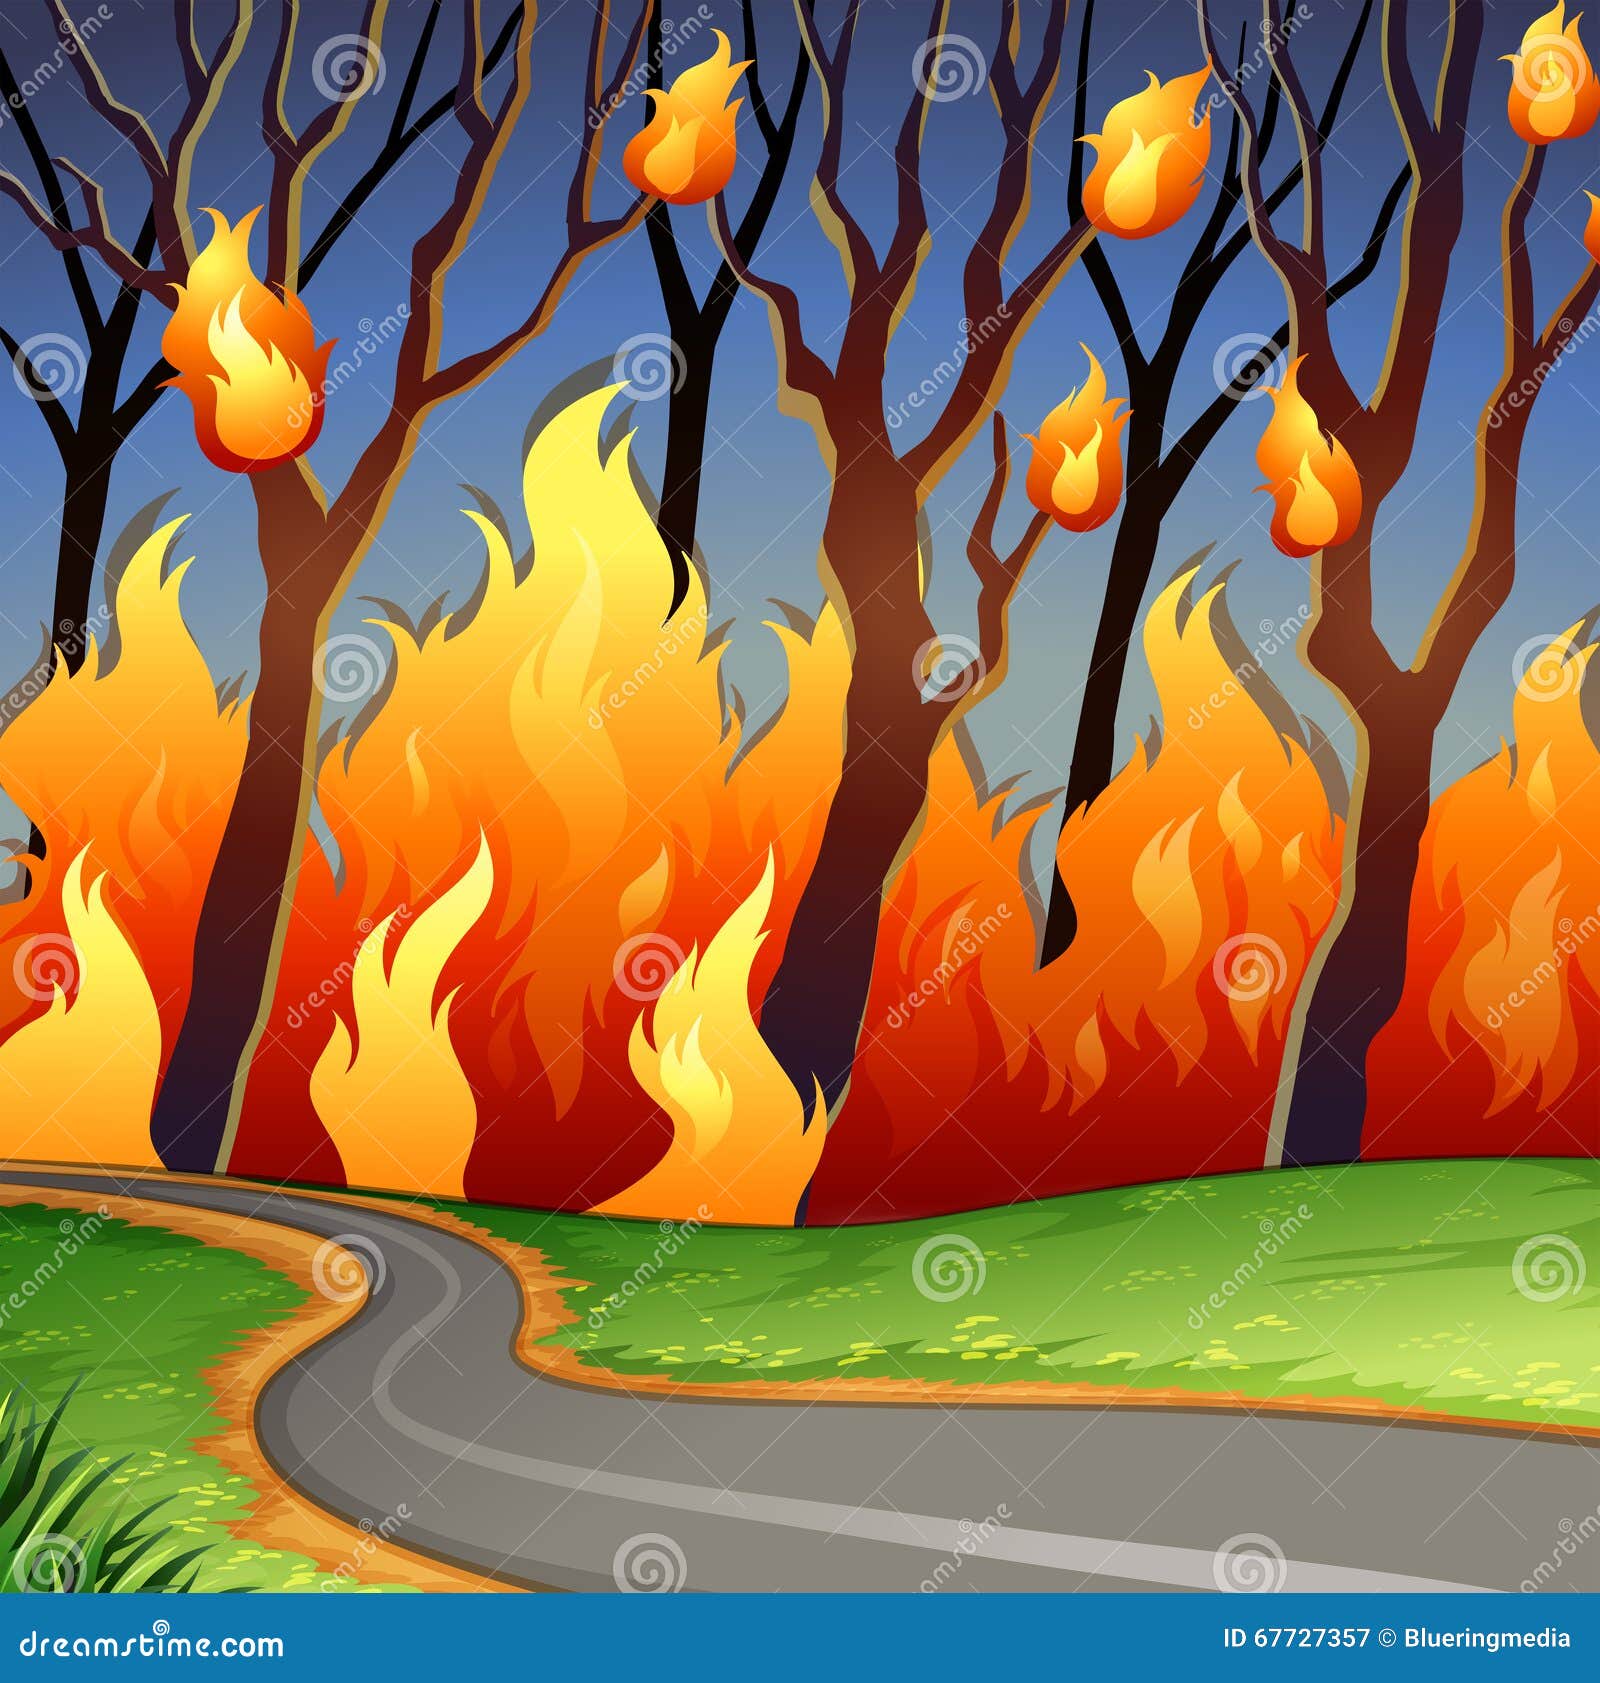 Disaster Scene Of Forest Fire Stock Vector - Image: 67727357